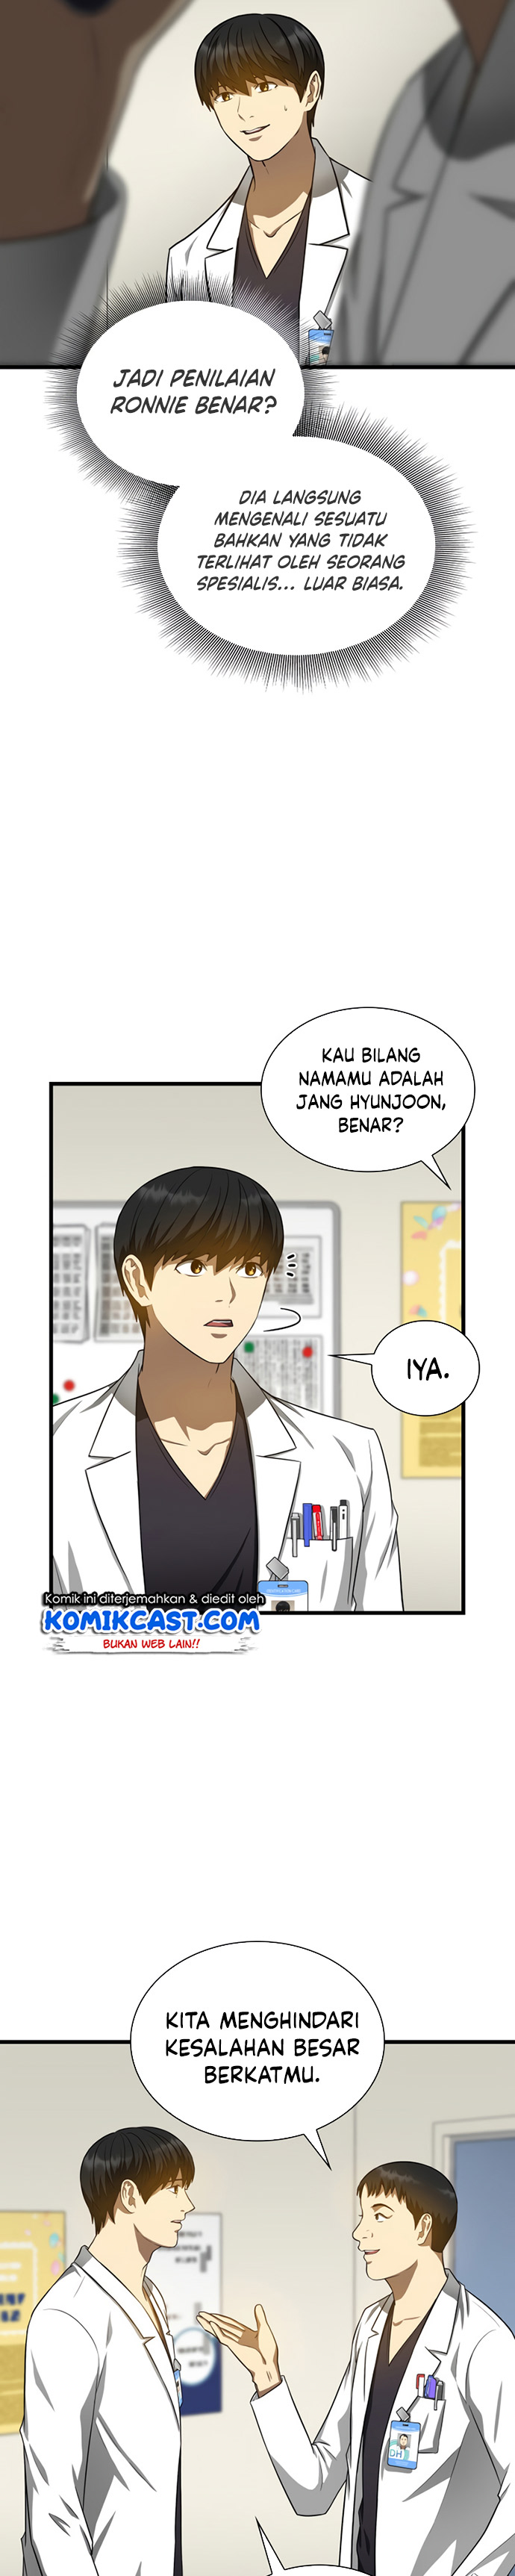 Perfect Surgeon Chapter 16 24